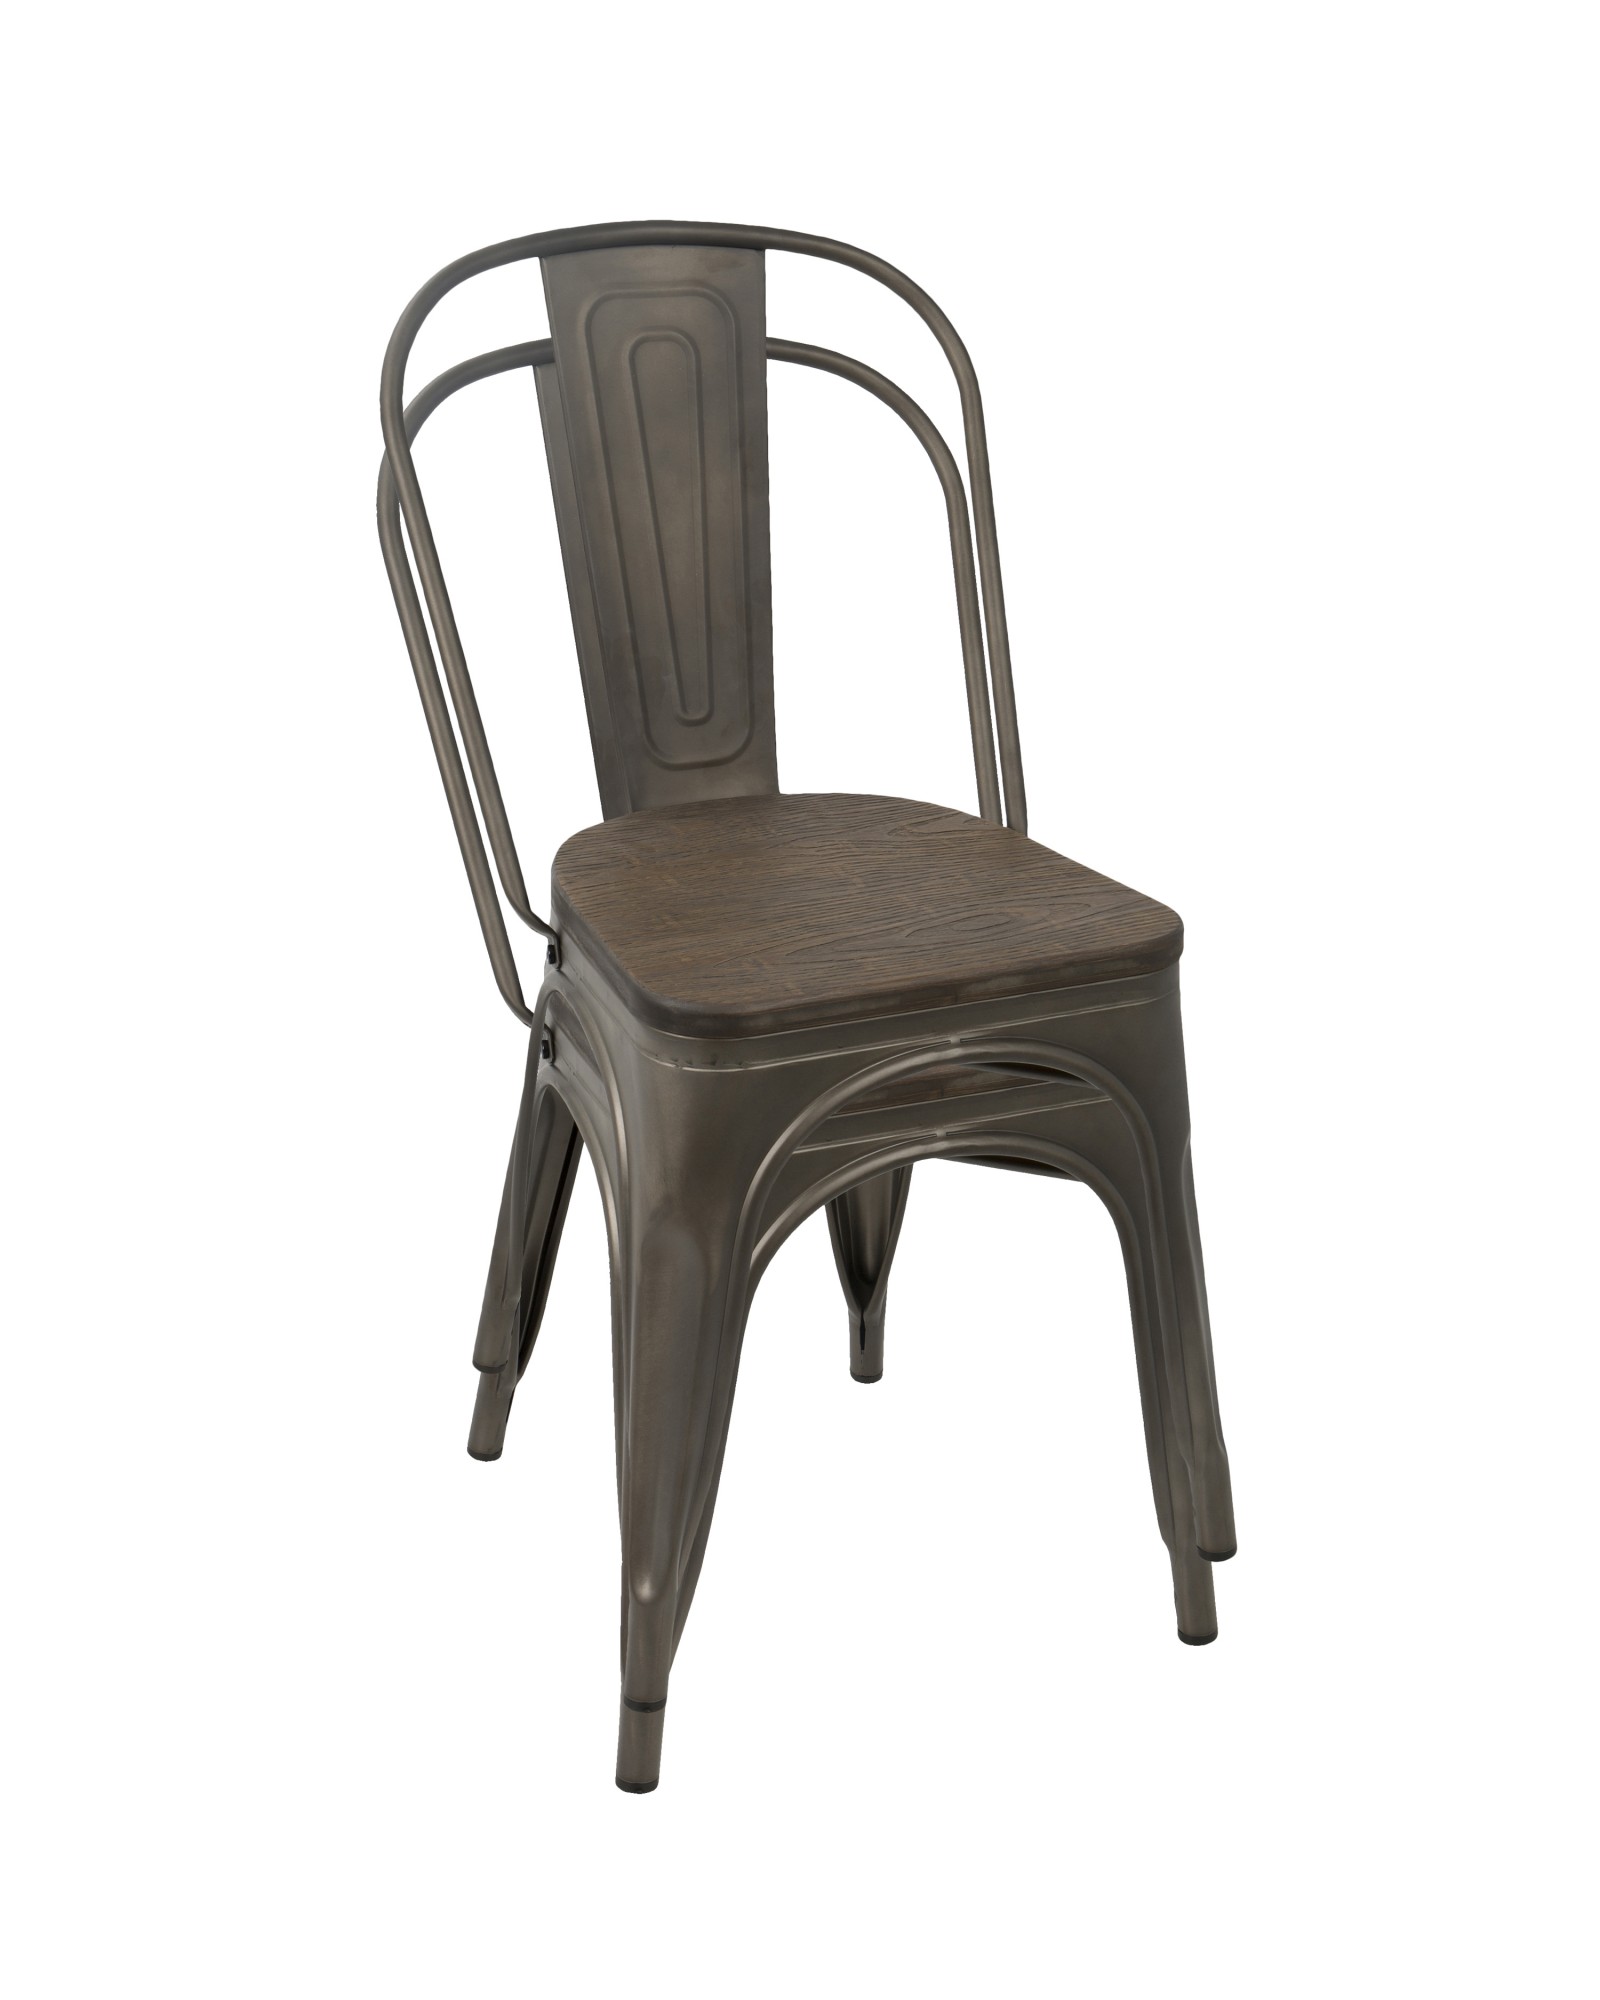 Oregon Industrial-Farmhouse Stackable Dining Chair in Antique and Espresso - Set of 2